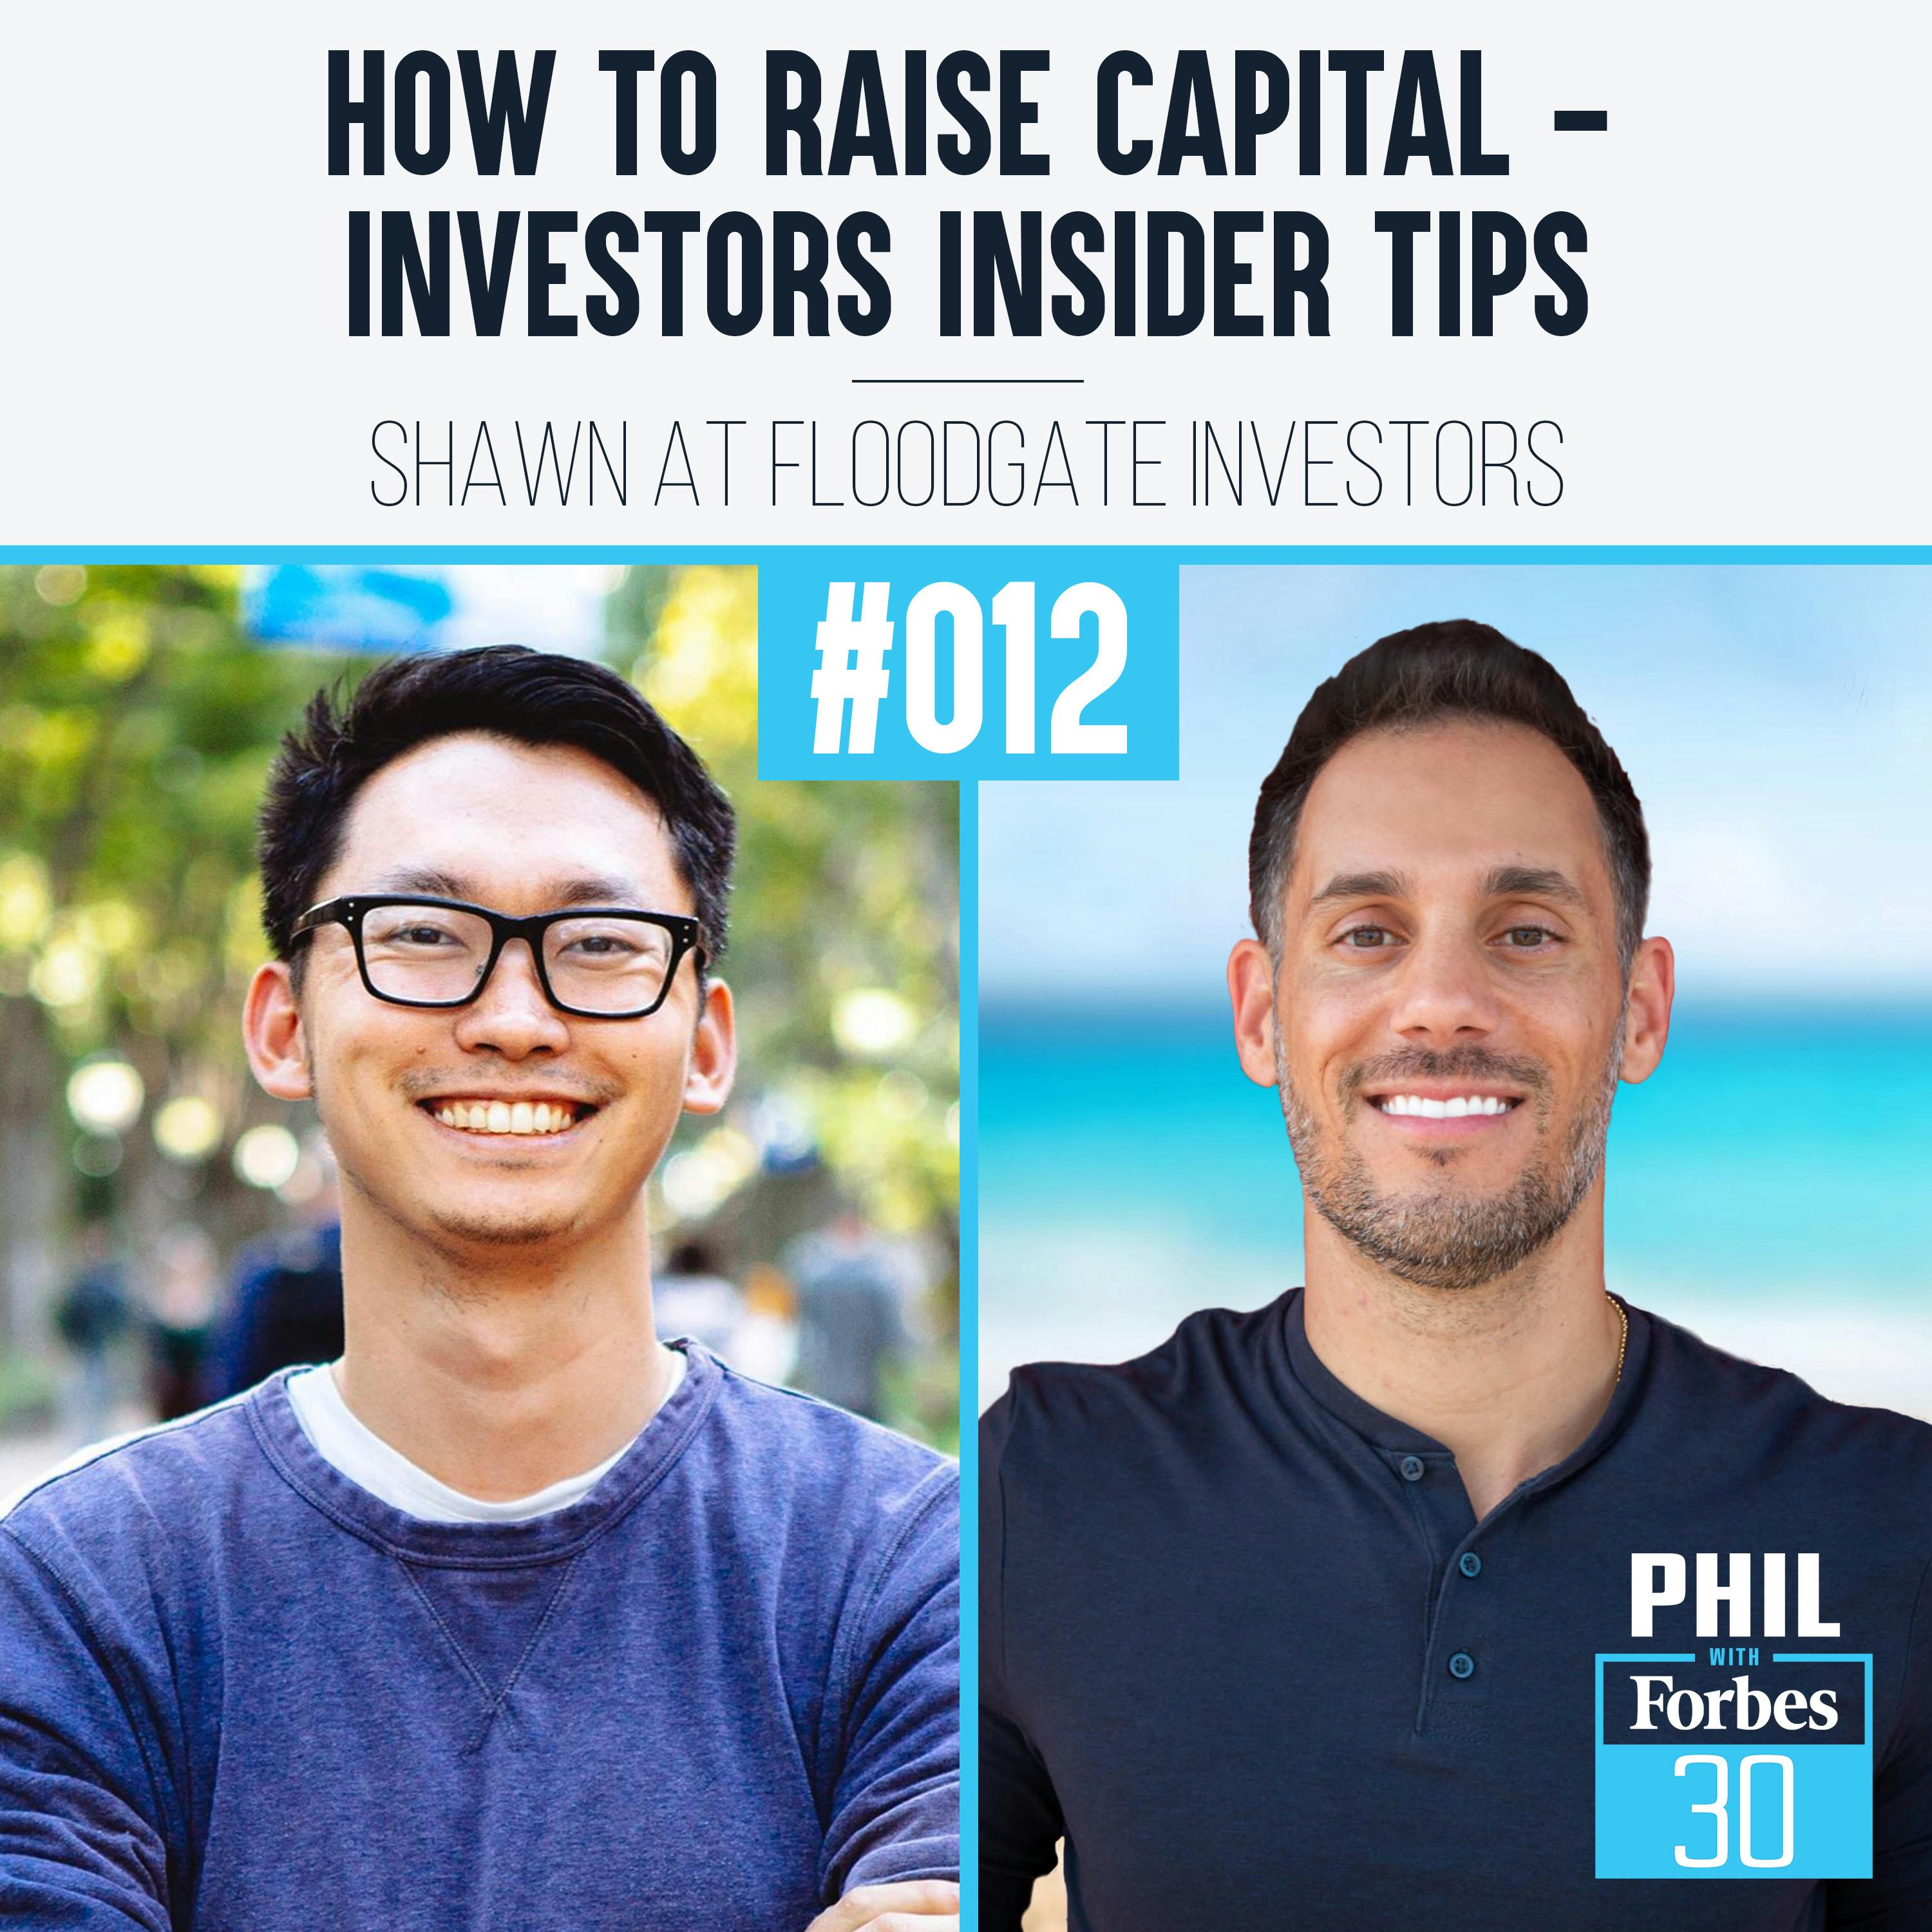 012 | ”How to Raise Capital - Investors Insider Tips” (Shawn at Floodgate Investors)